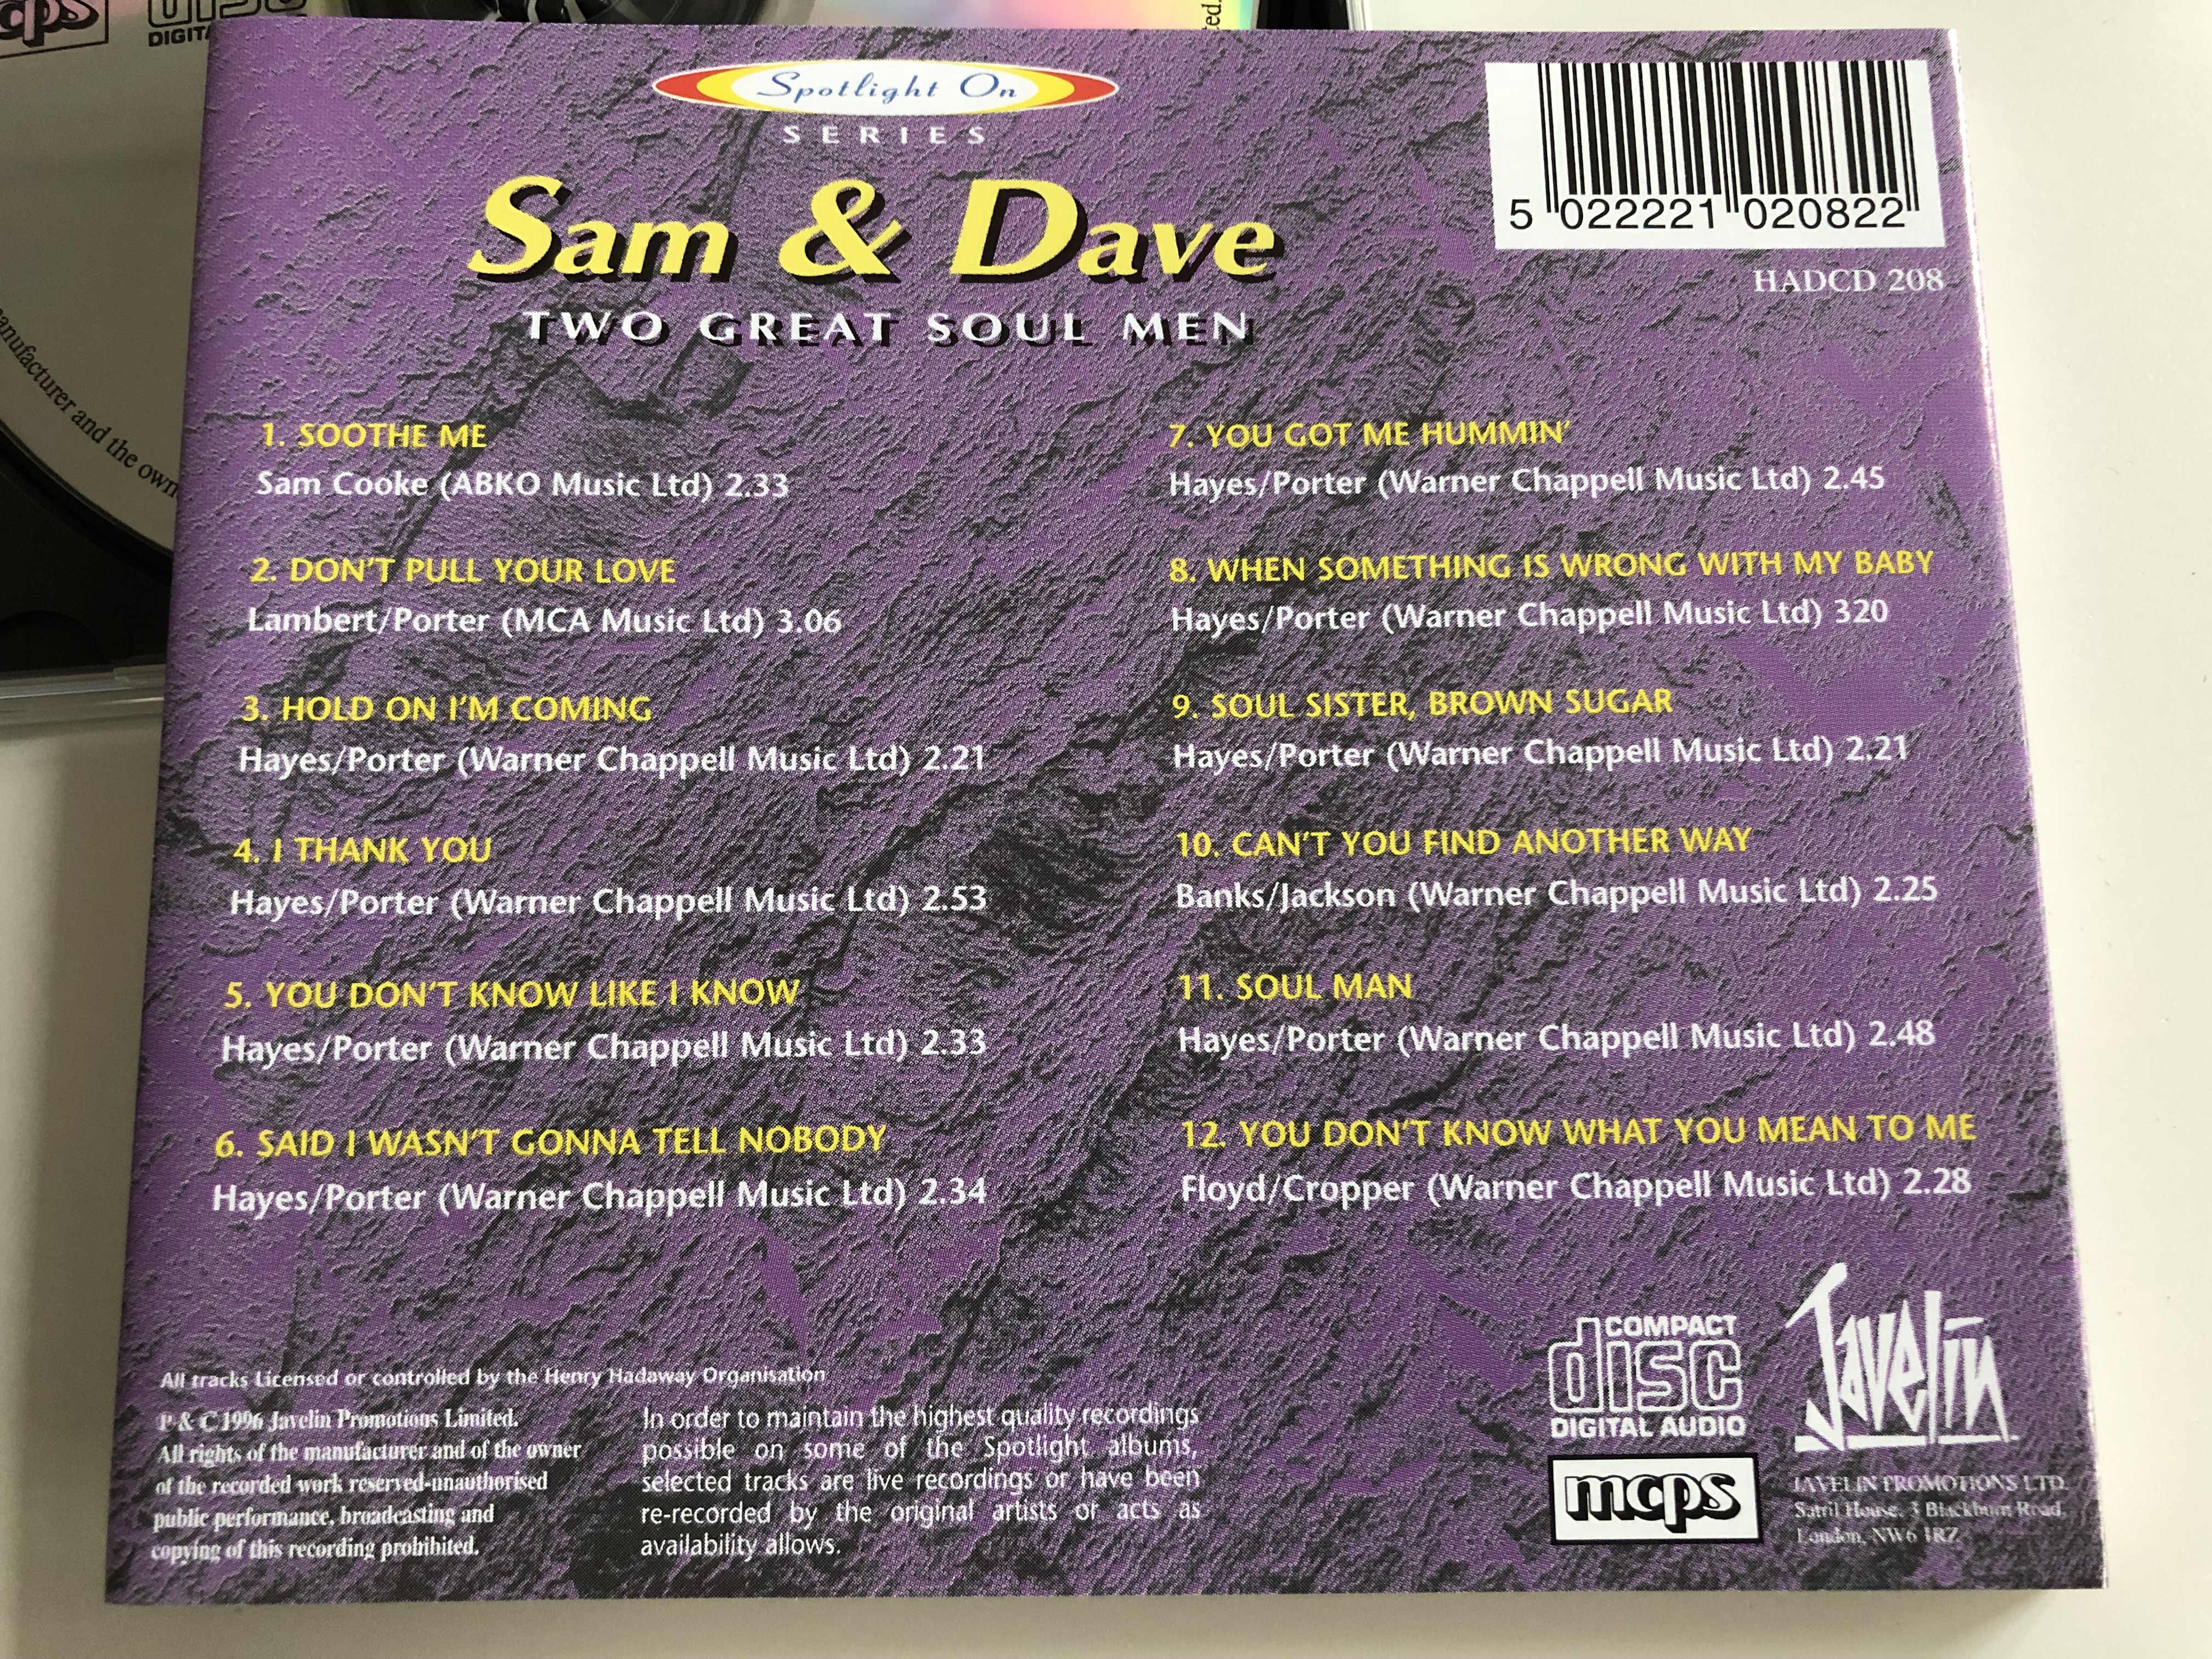 sam-dave-two-great-soul-men-featuring-hold-on-i-m-coming-soul-man-soul-sister-brown-sugar-soothe-me-javelin-audio-cd-1996-hadcd208-3-.jpg